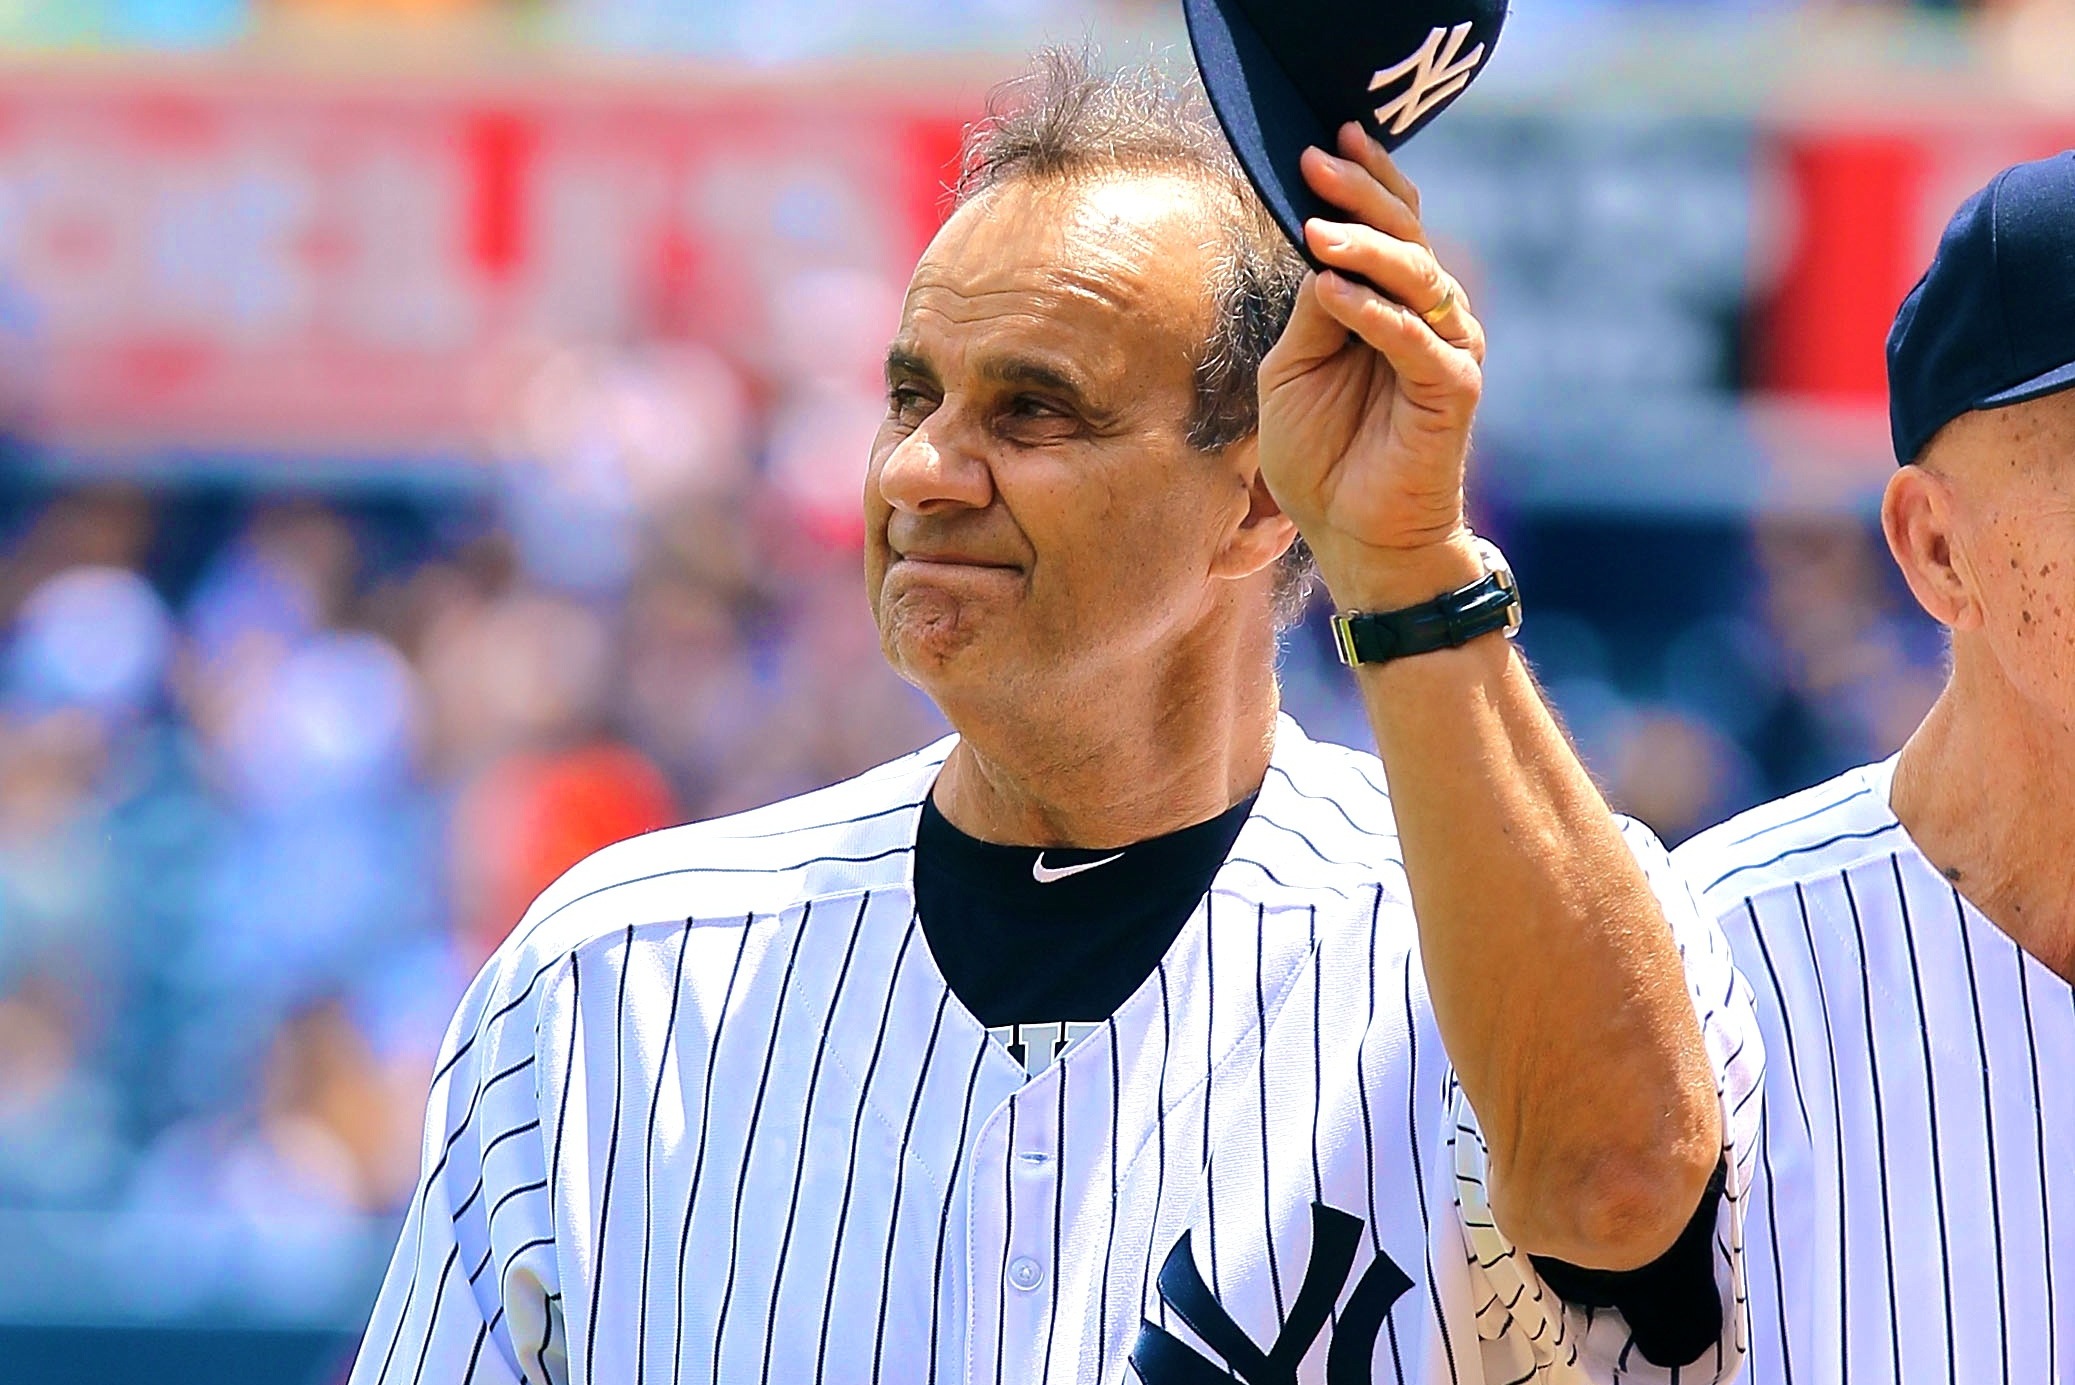 25 years ago, Joe Torre took the Yankees' managerial job - and the